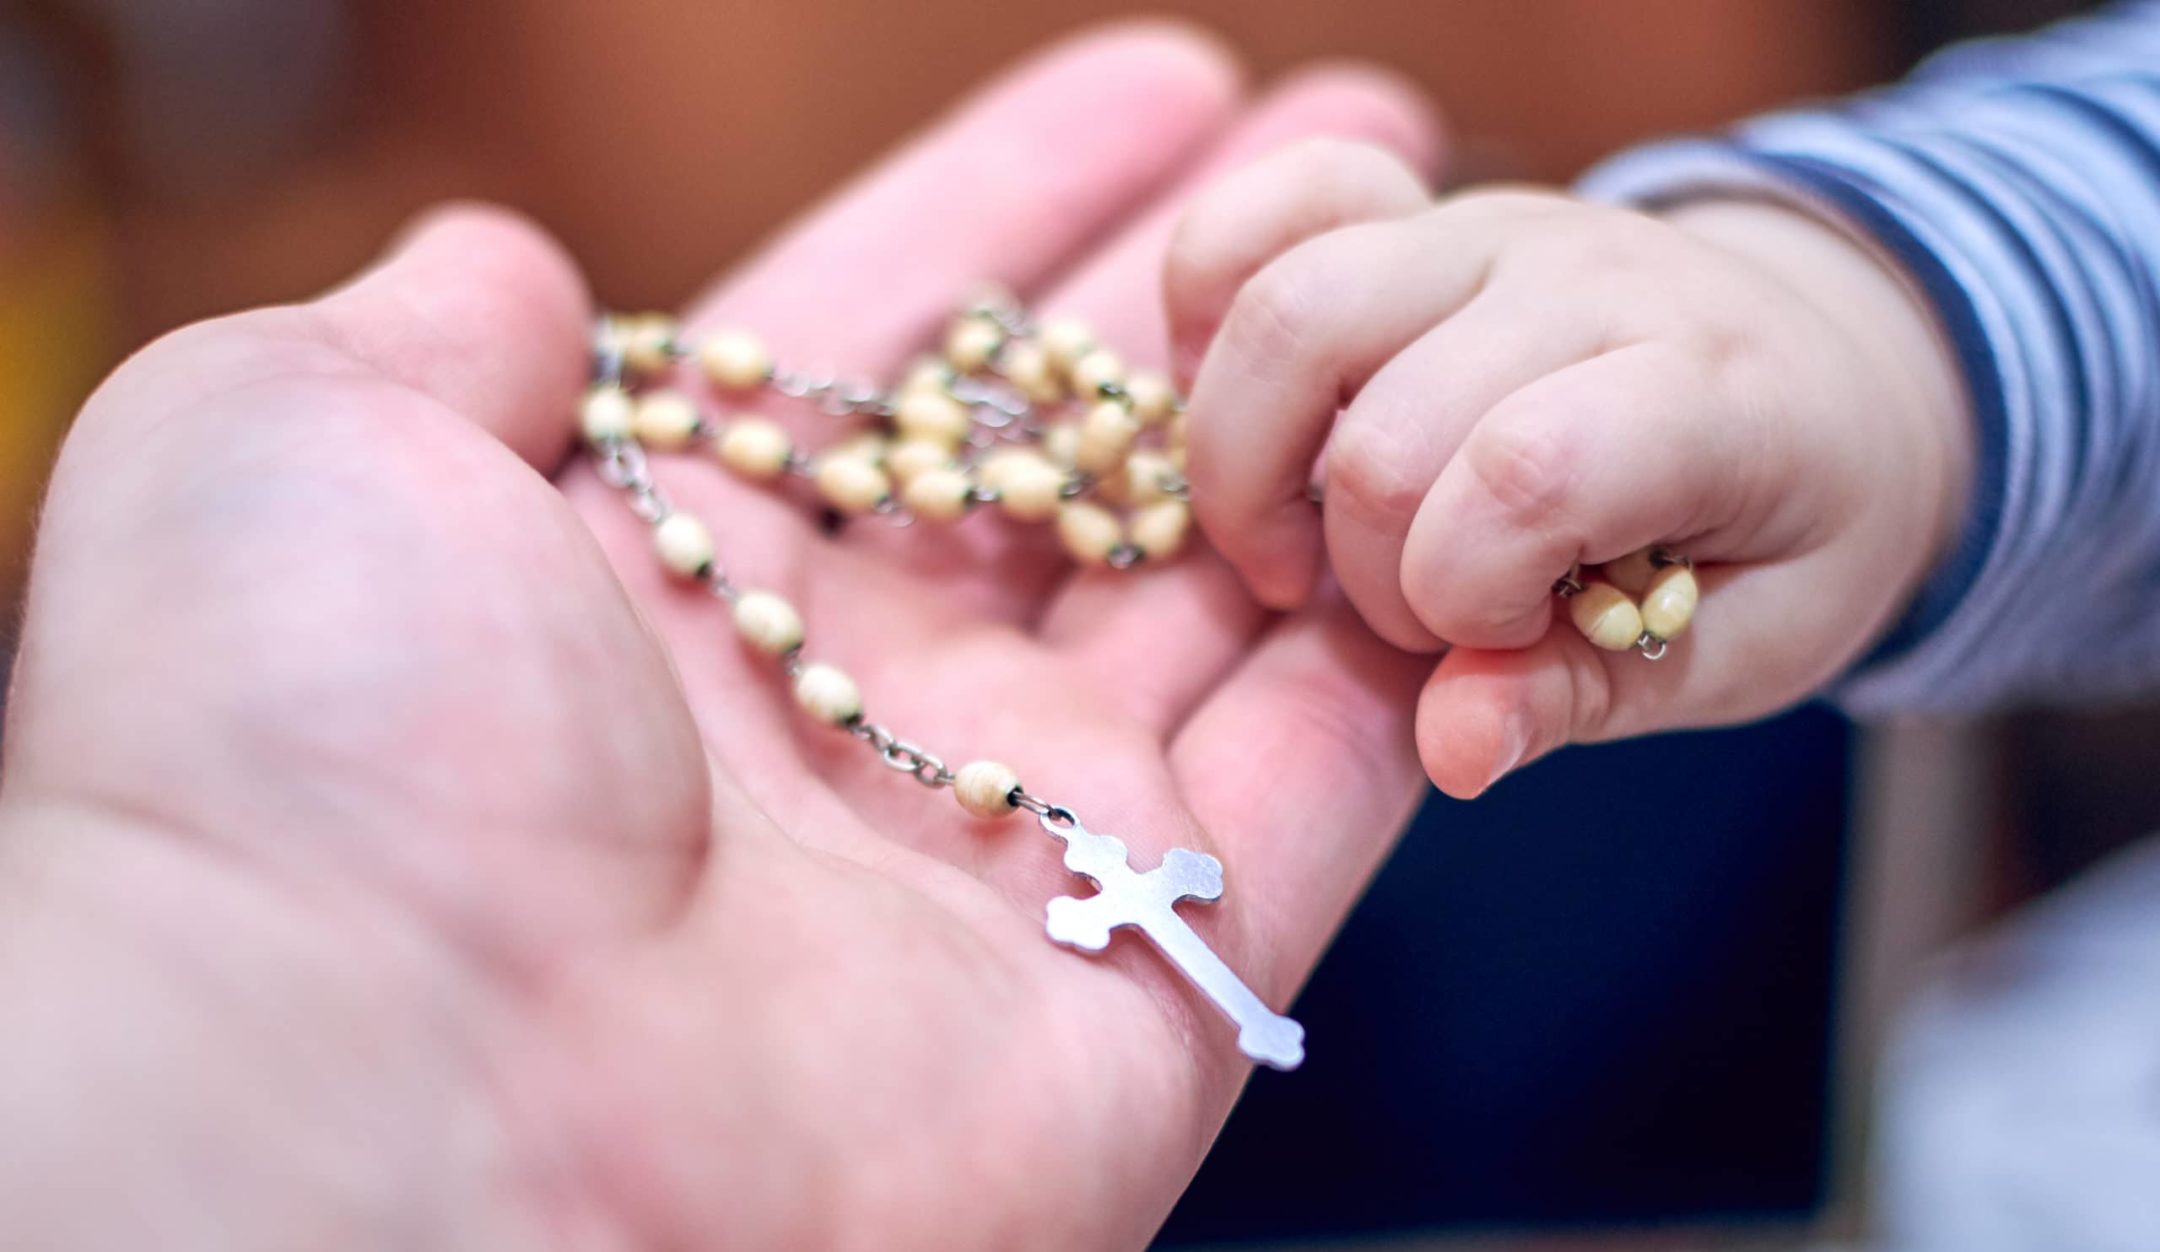 small child hand taking a rosary from his dad's hand